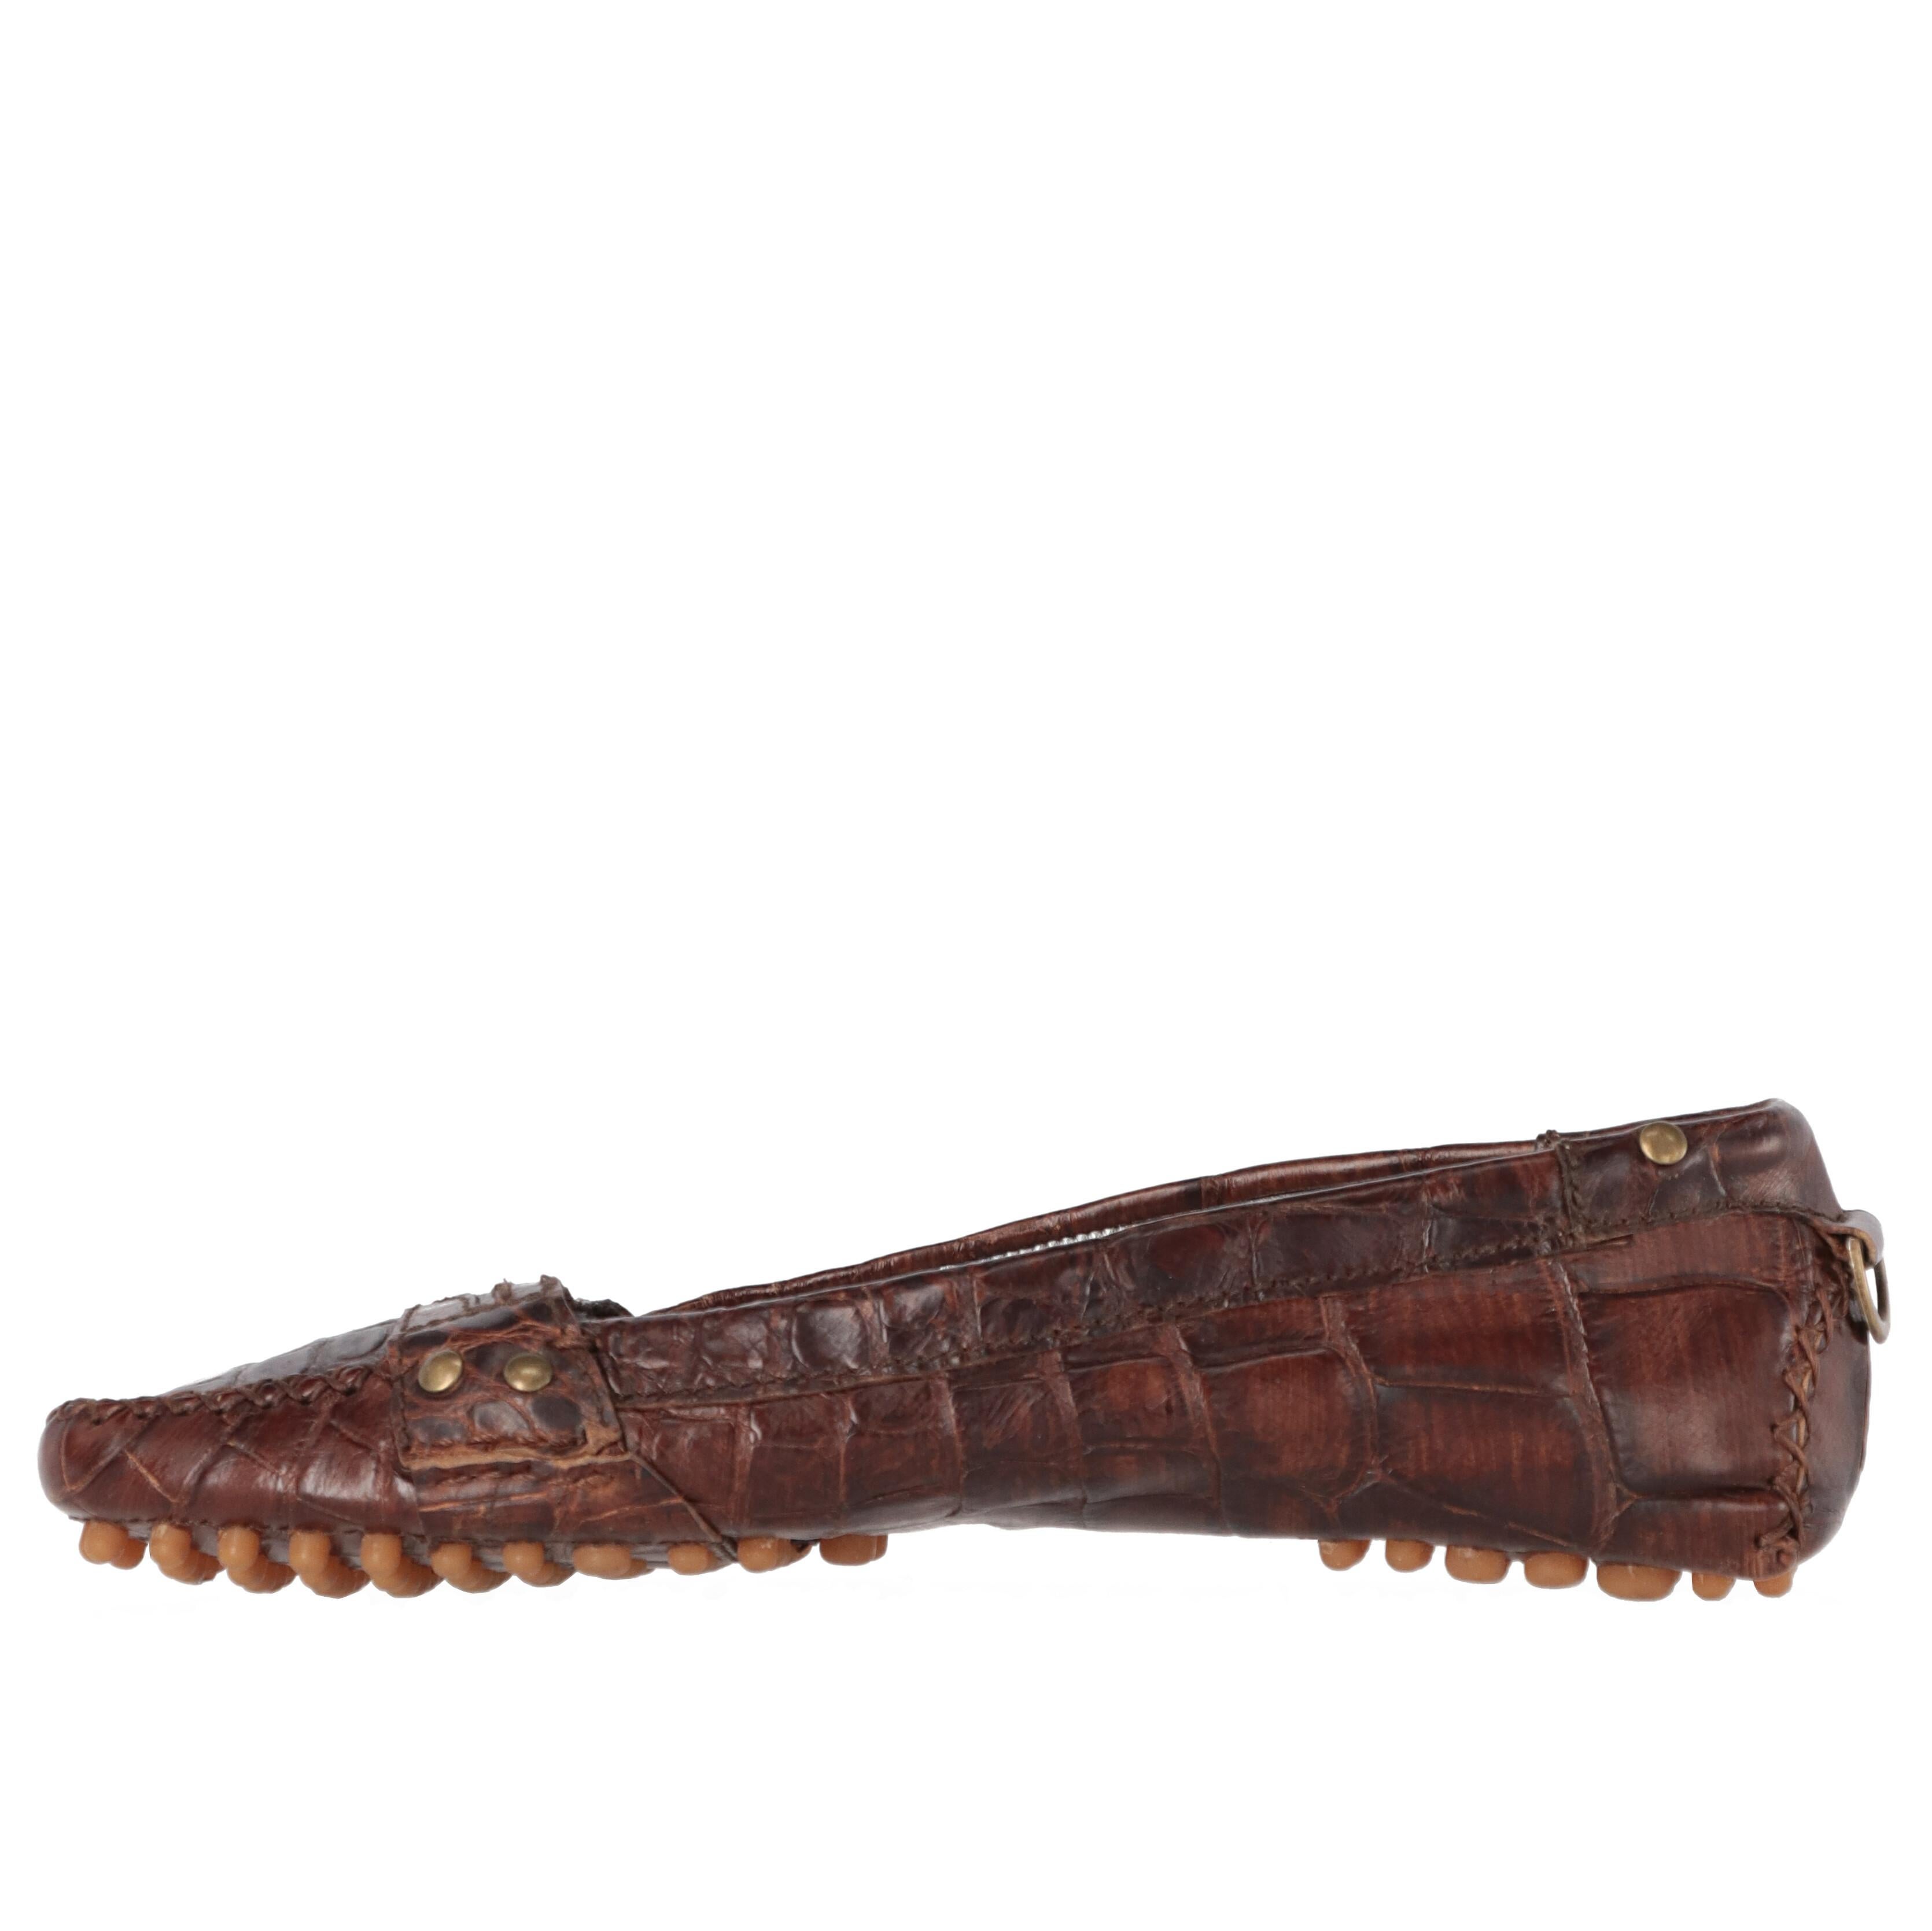 Gianfranco Ferré brown crocodile leather loafers with square toe and rubber spikes sole.

Please note that this item cannot be shipped outside the E.U.


Years: 2000s

Made in Italy

Size: 38,5 EU

Length insole: 24,5 cm